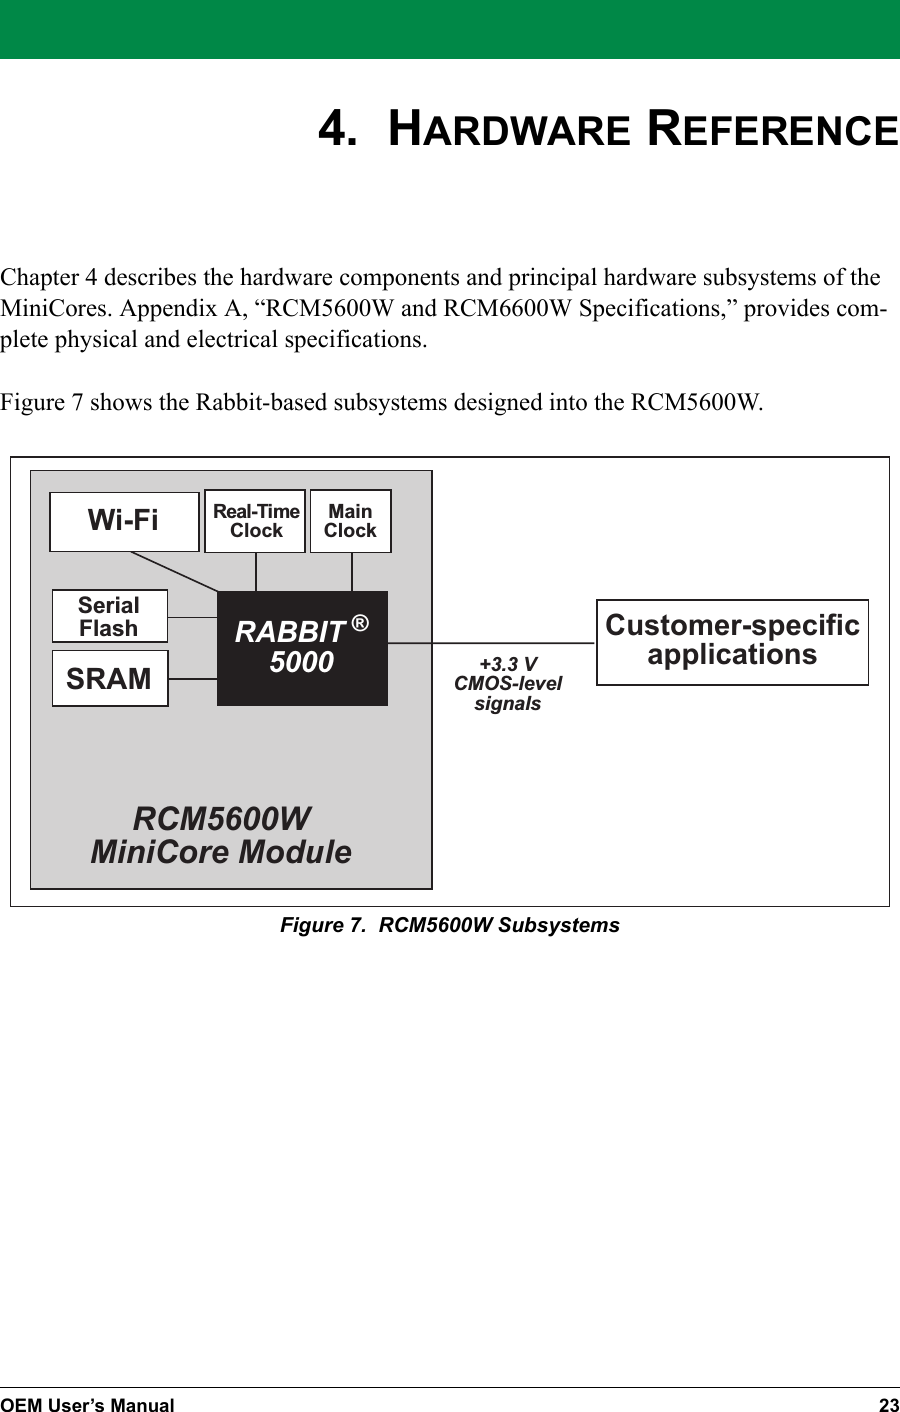 OEM User’s Manual 234.  HARDWARE REFERENCEChapter 4 describes the hardware components and principal hardware subsystems of the MiniCores. Appendix A, “RCM5600W and RCM6600W Specifications,” provides com-plete physical and electrical specifications.Figure 7 shows the Rabbit-based subsystems designed into the RCM5600W.RCM5600WMiniCore ModuleRABBIT ®5000+3.3 VCMOS-levelsignalsCustomer-specificapplicationsReal-TimeClockMainClockSRAMSerialFlashWi-FiFigure 7.  RCM5600W Subsystems